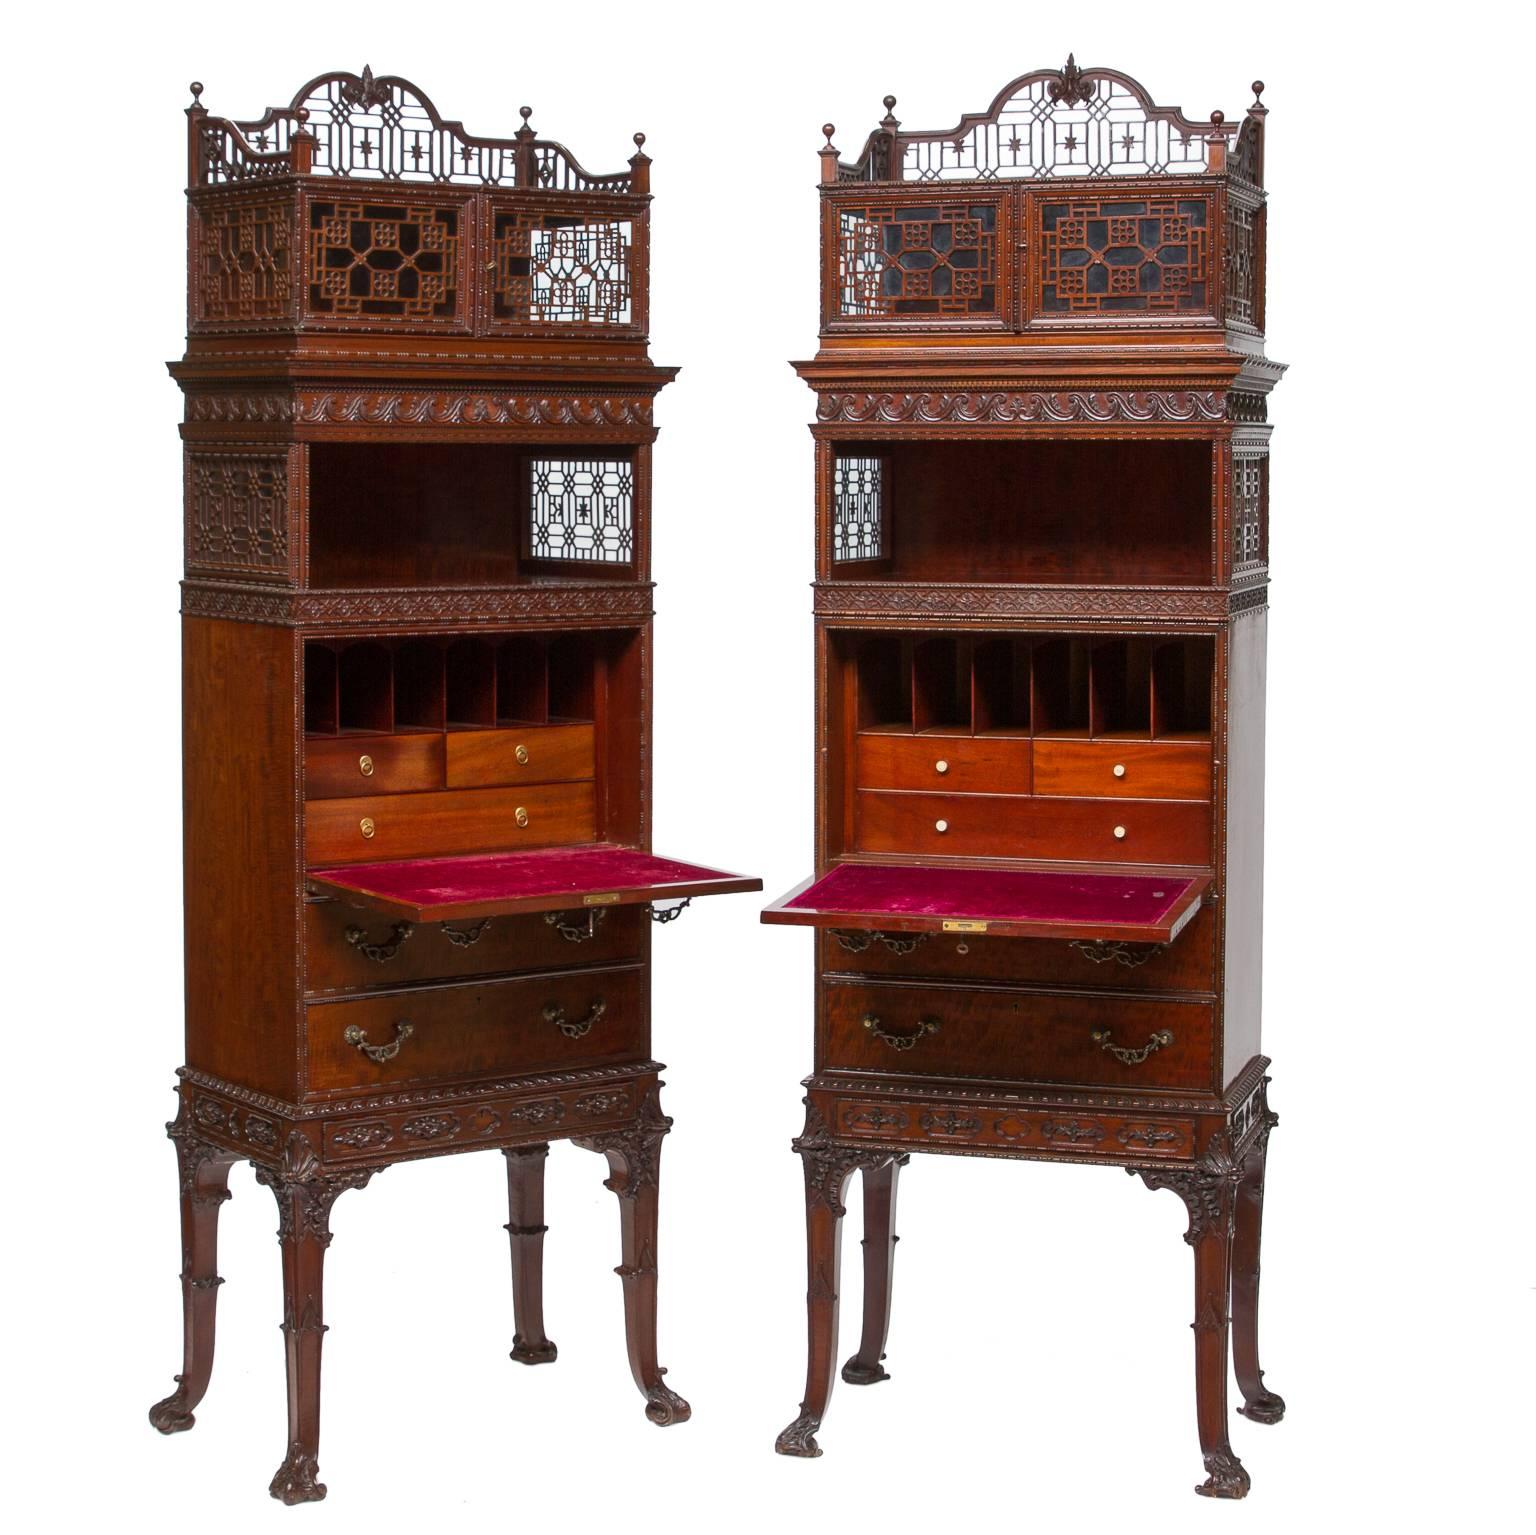 19th century Chippendale mahogany cabinets with secretary fronts

This is an amazing pair of cabinets. An example of fine craftsmanship is visible in these two cabinets. It is rare to find this type of quality. Quality is found in the selection of